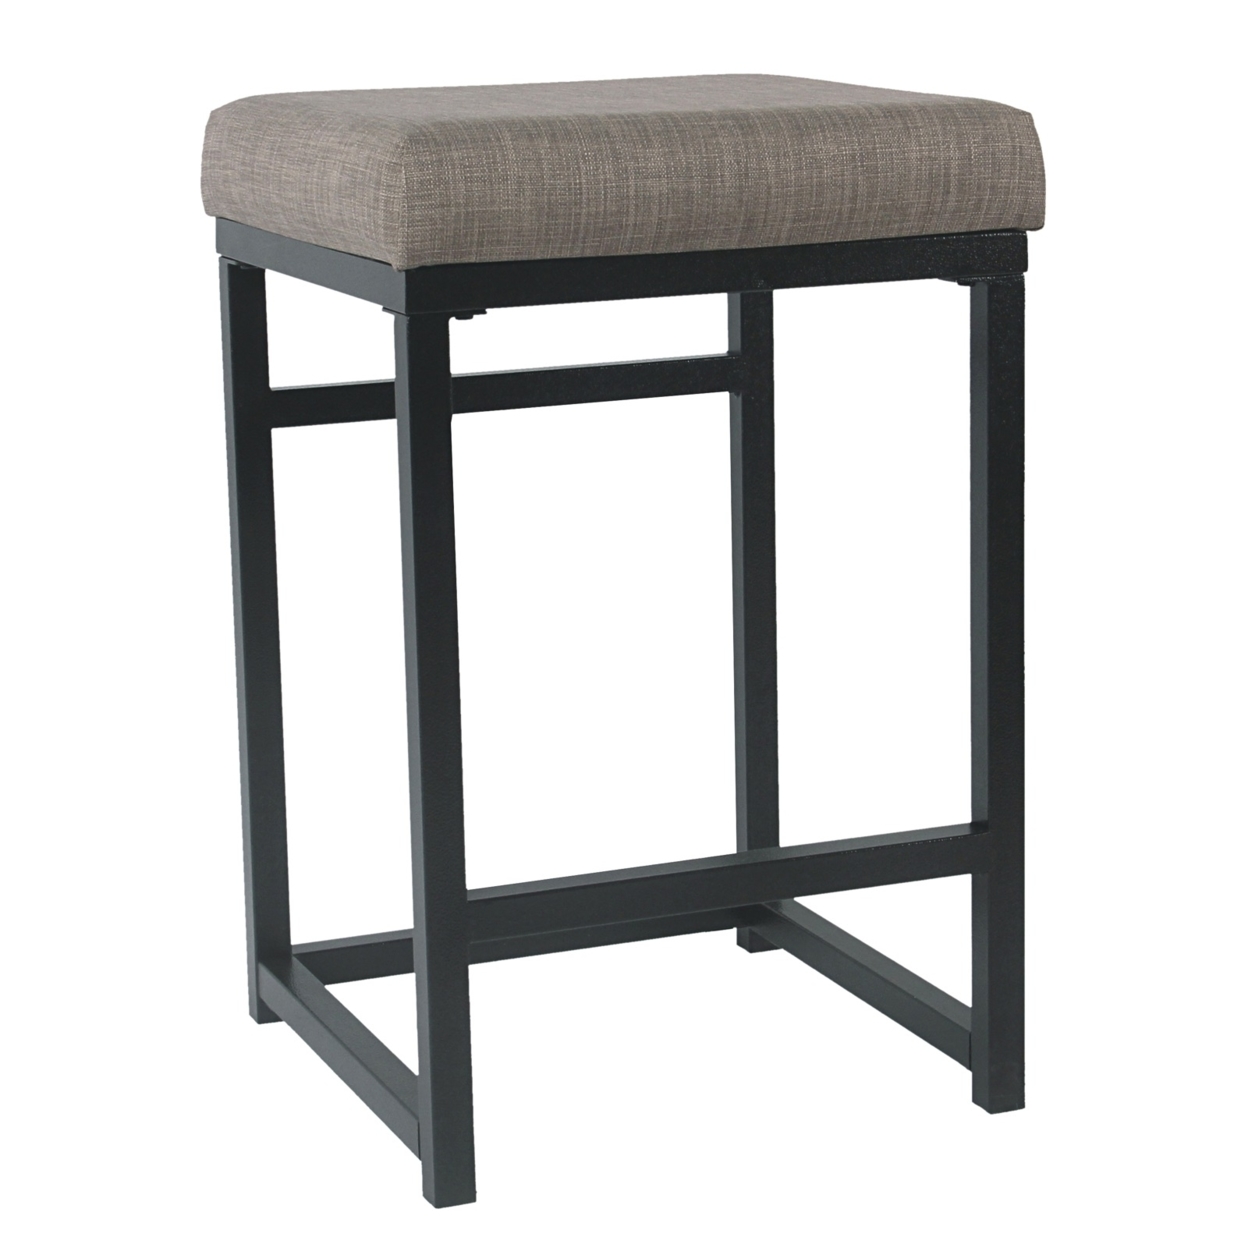 Metal Open Back Counter Stool With Fabric Upholstered Padded Seat, Brown And Black- Saltoro Sherpi